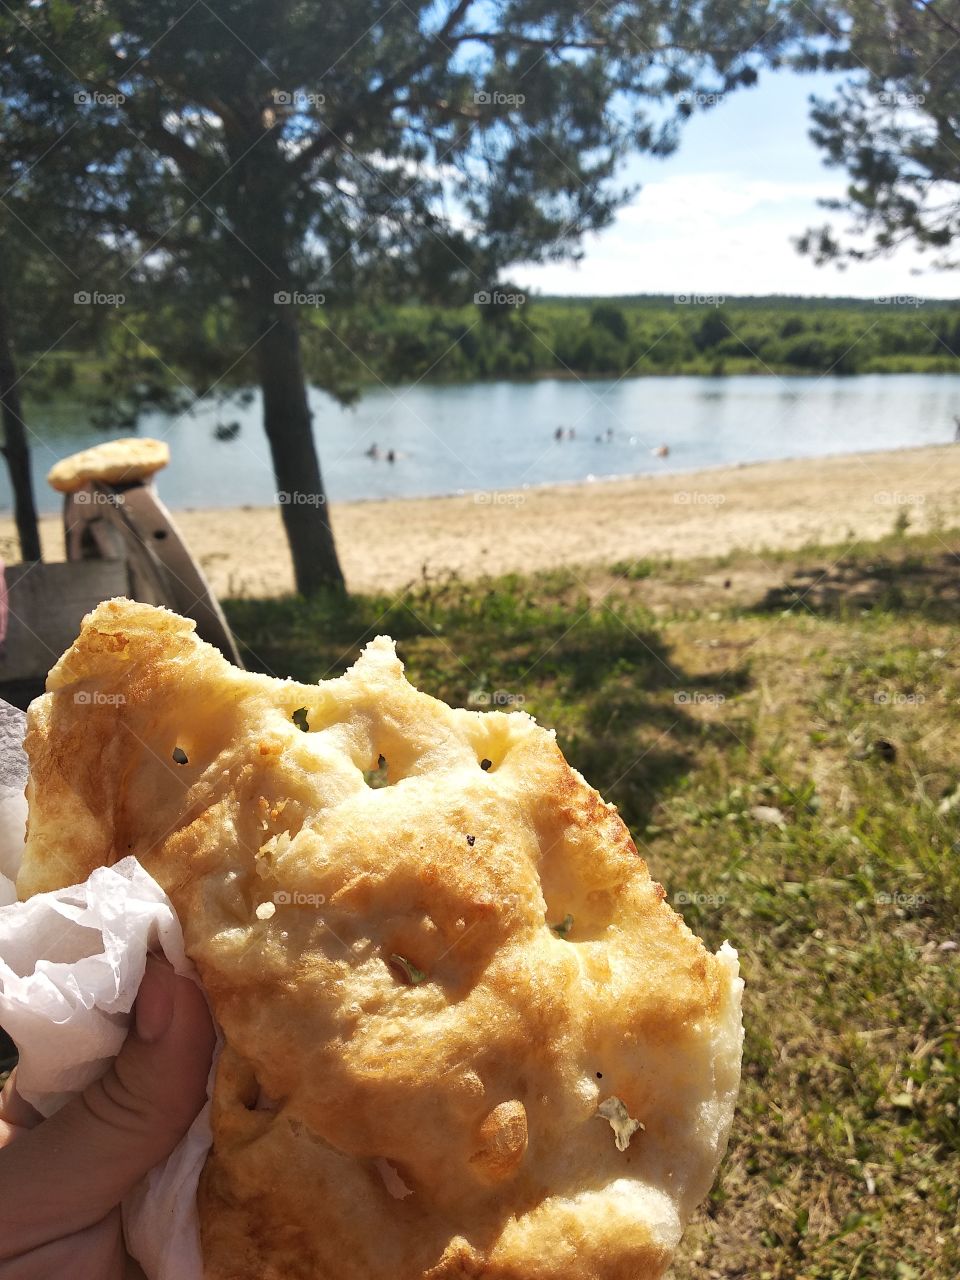 Fried flatbread, cake in hand against the background of the beach, lake and tree